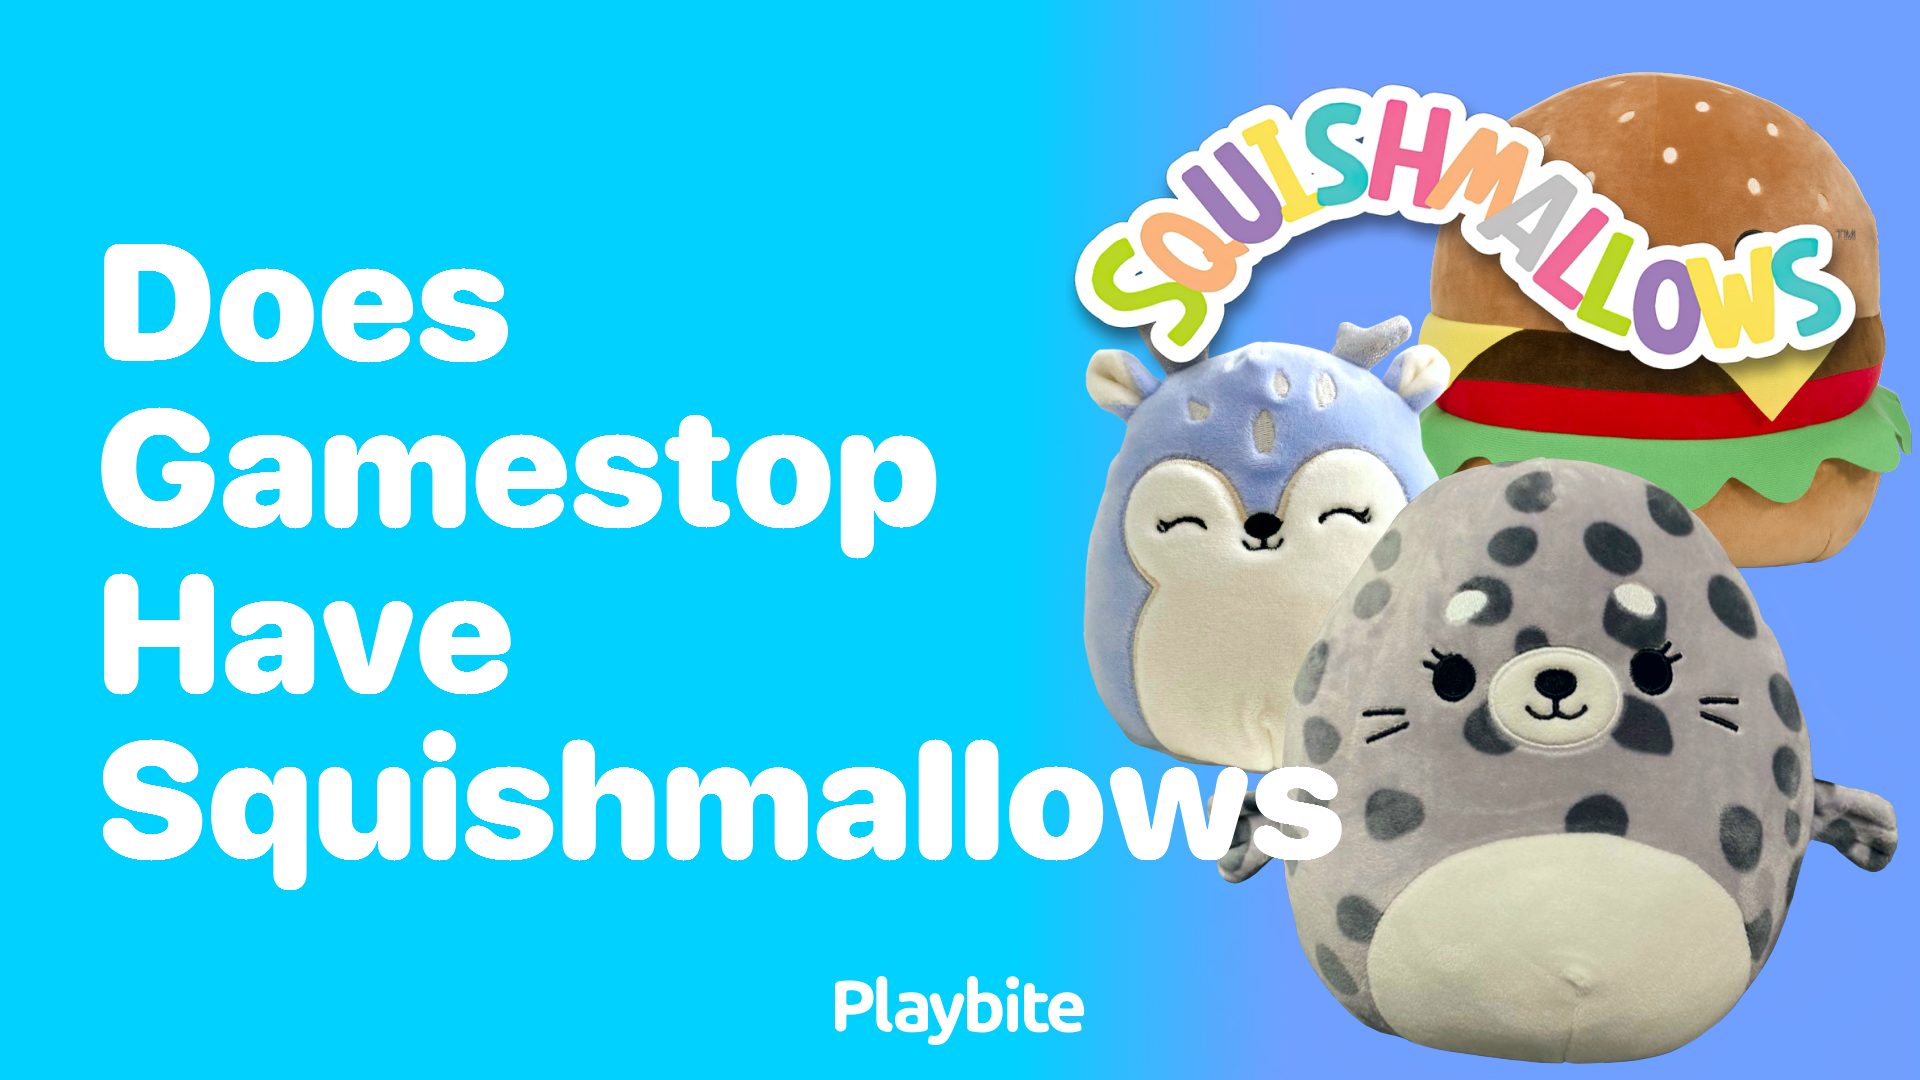 Does GameStop Have Squishmallows? Find Out Here!